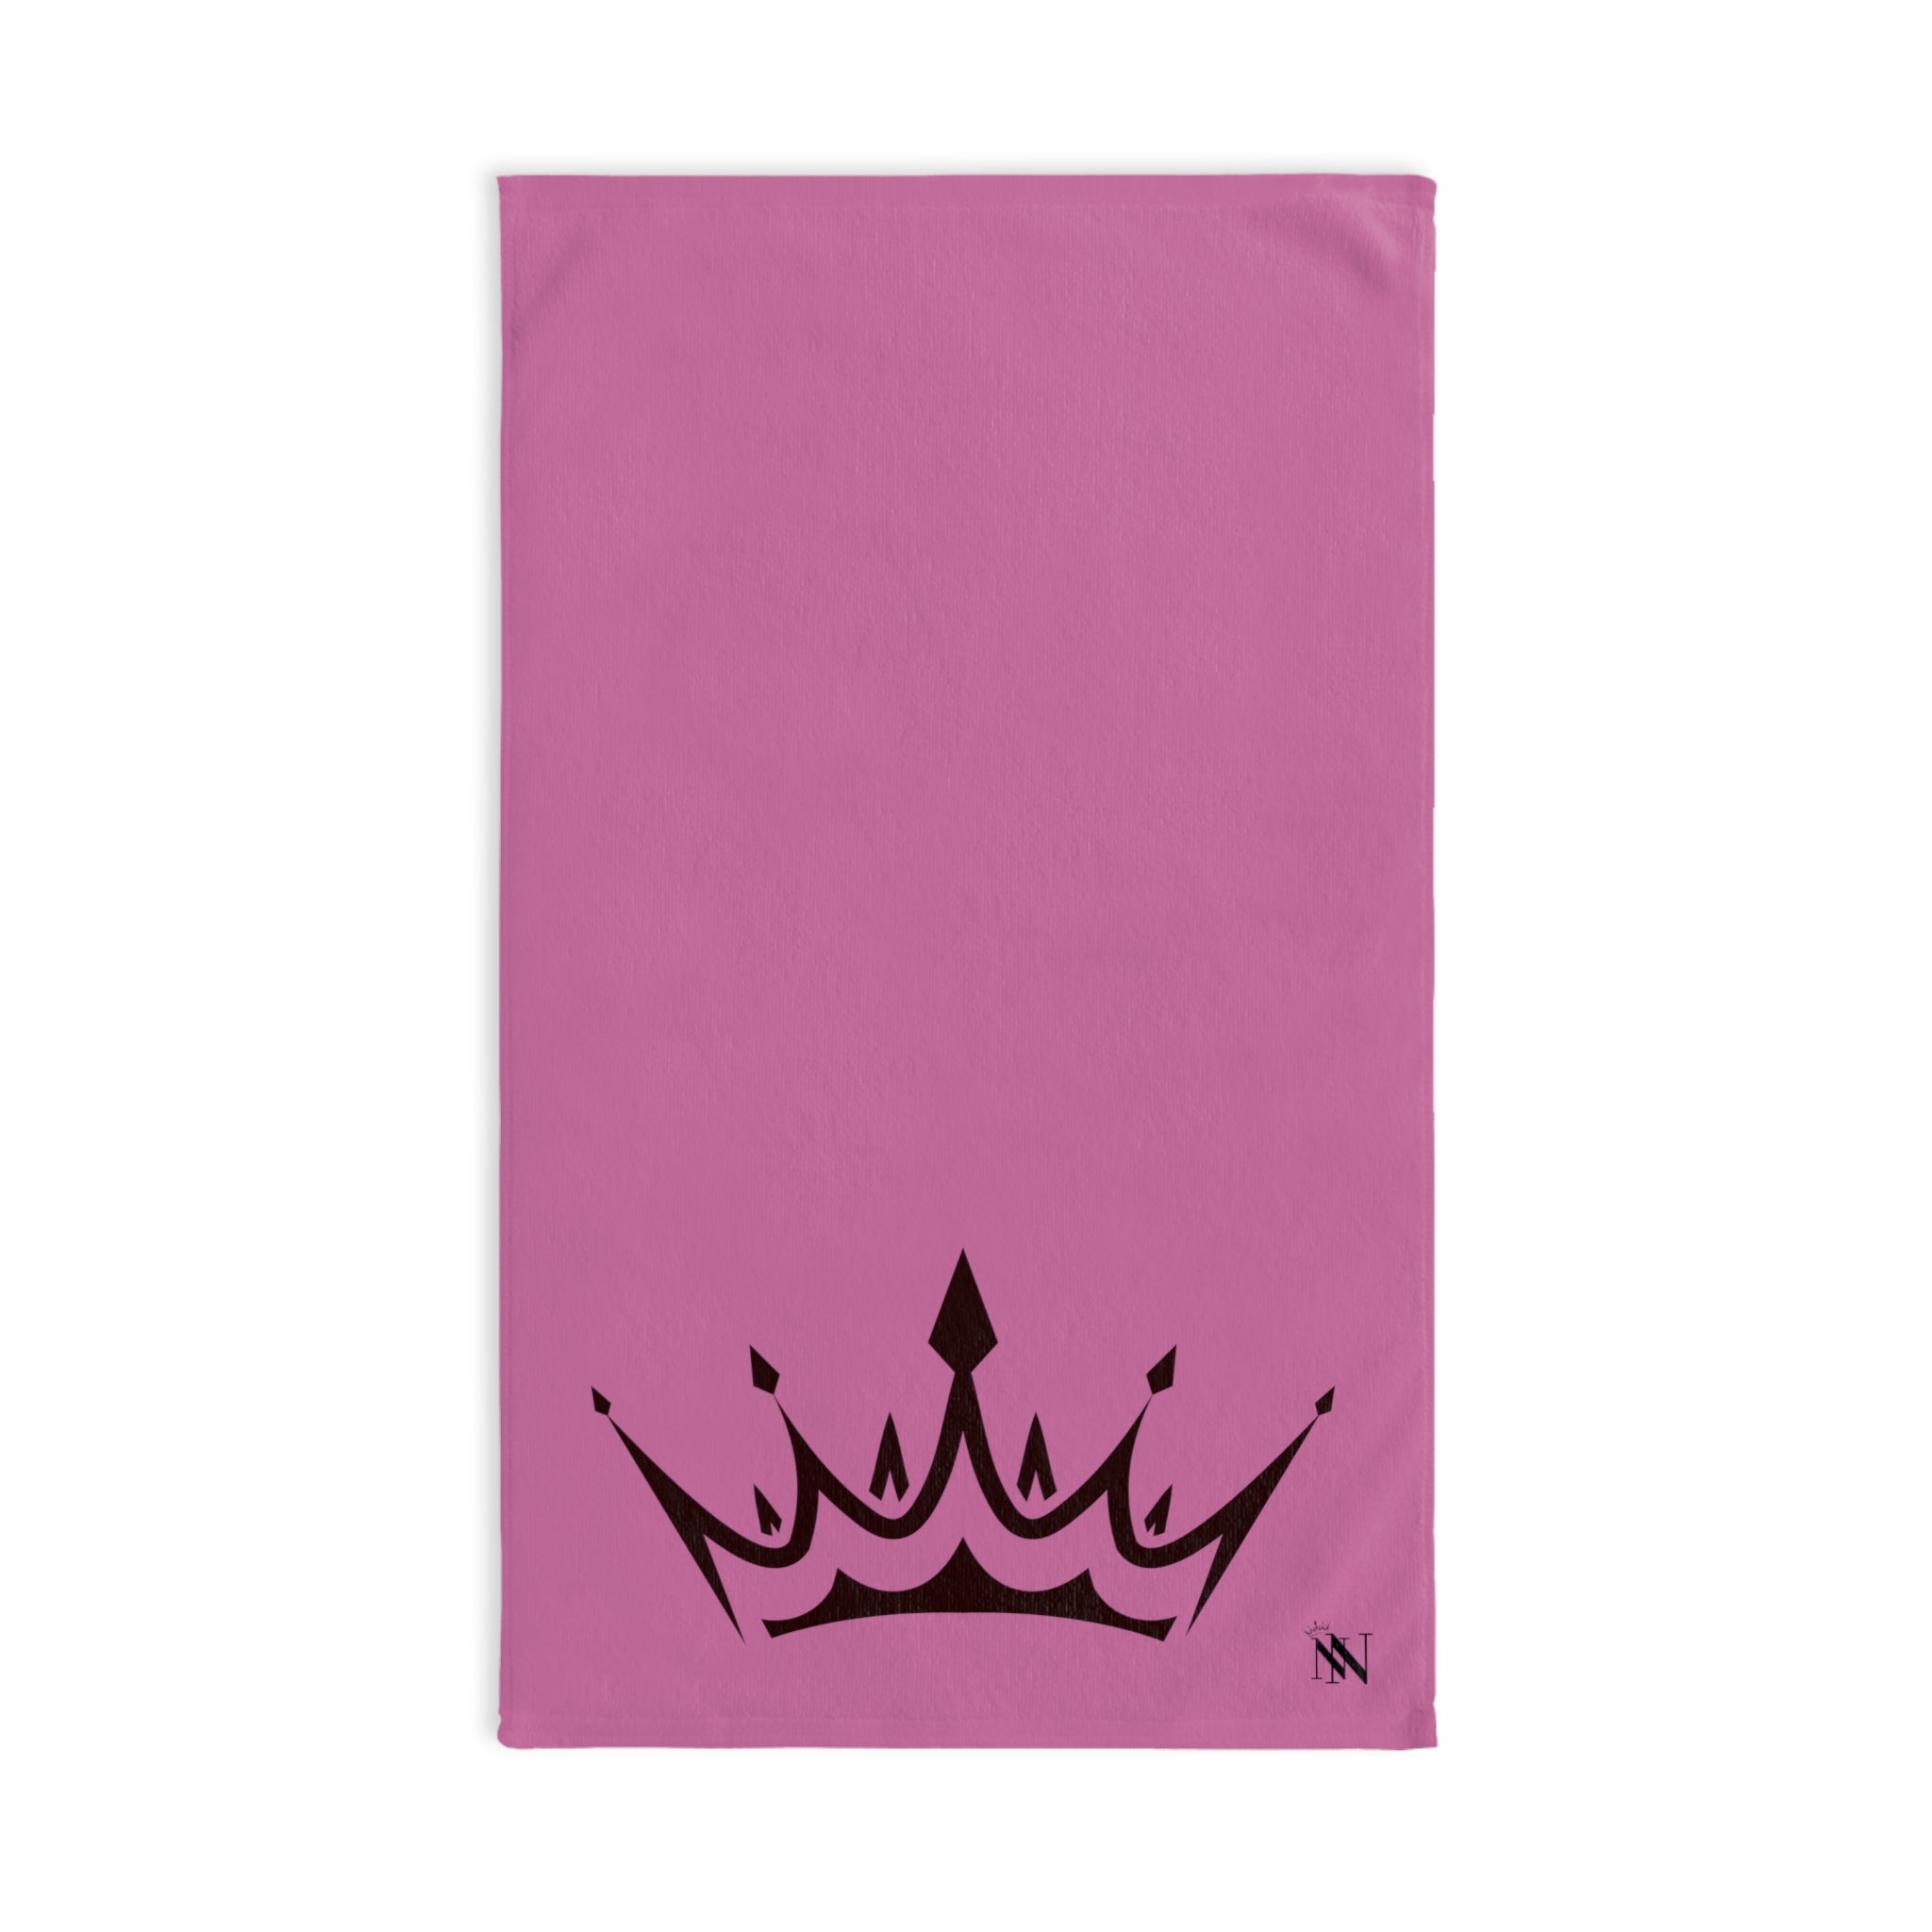 Tiara Queen Black Pink | Novelty Gifts for Boyfriend, Funny Towel Romantic Gift for Wedding Couple Fiance First Year Anniversary Valentines, Party Gag Gifts, Joke Humor Cloth for Husband Men BF NECTAR NAPKINS